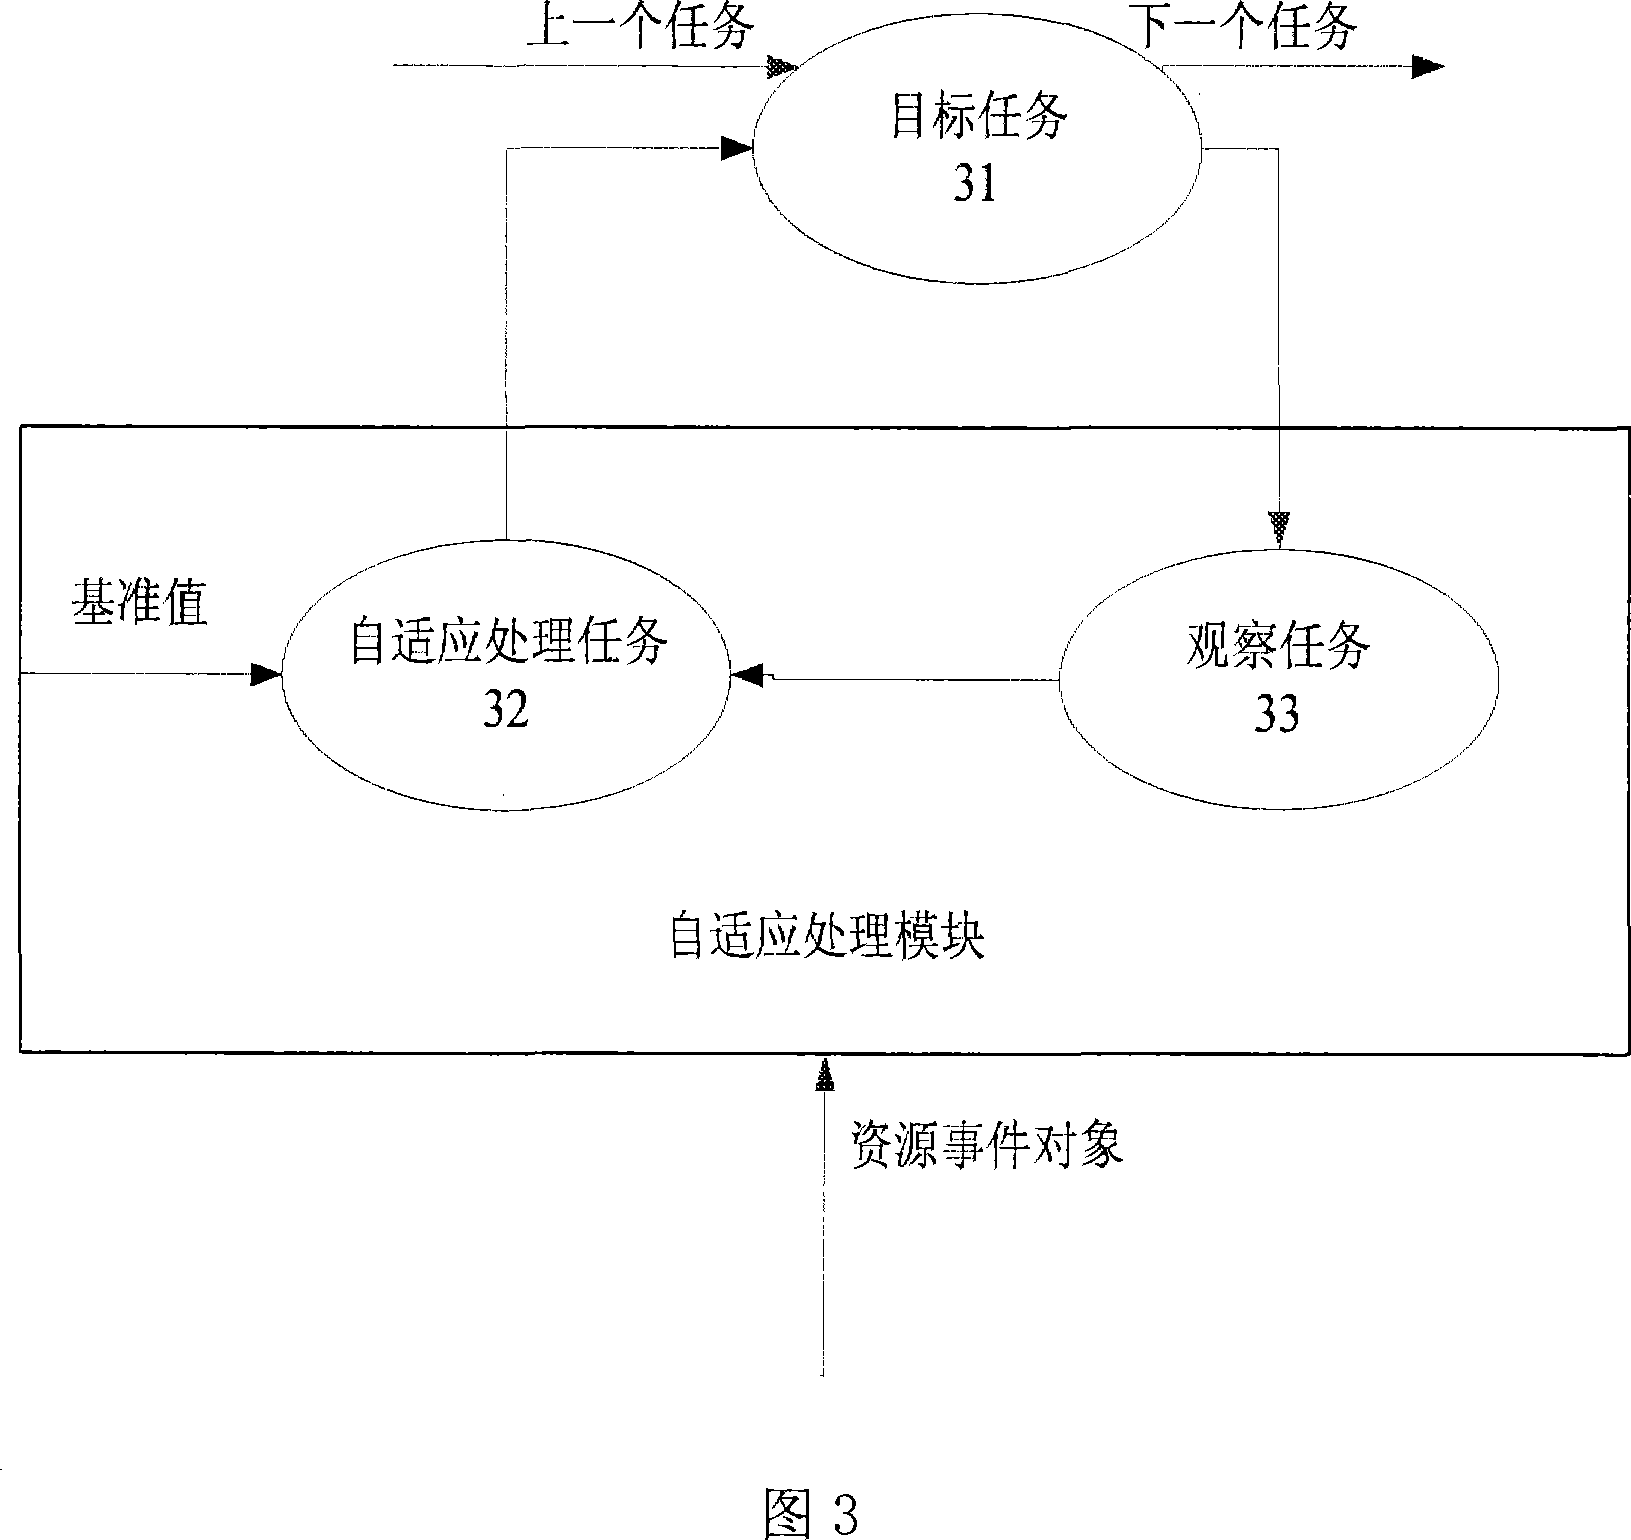 Energy consumption management method for inserting system